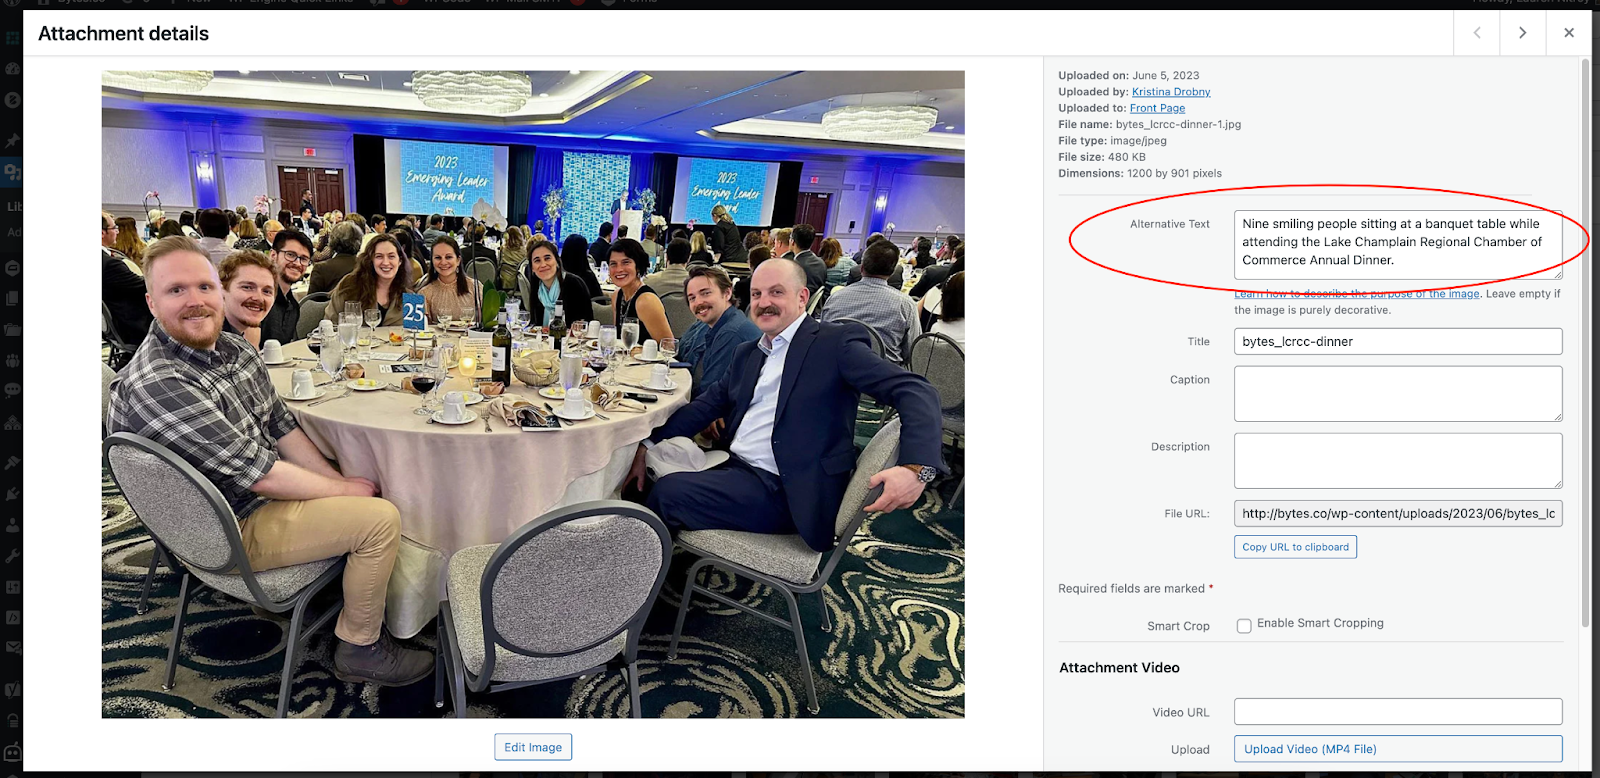 Example of alternative text (alt text) for an image of the Bytes.co team at a banquet as seen in the WordPress backend